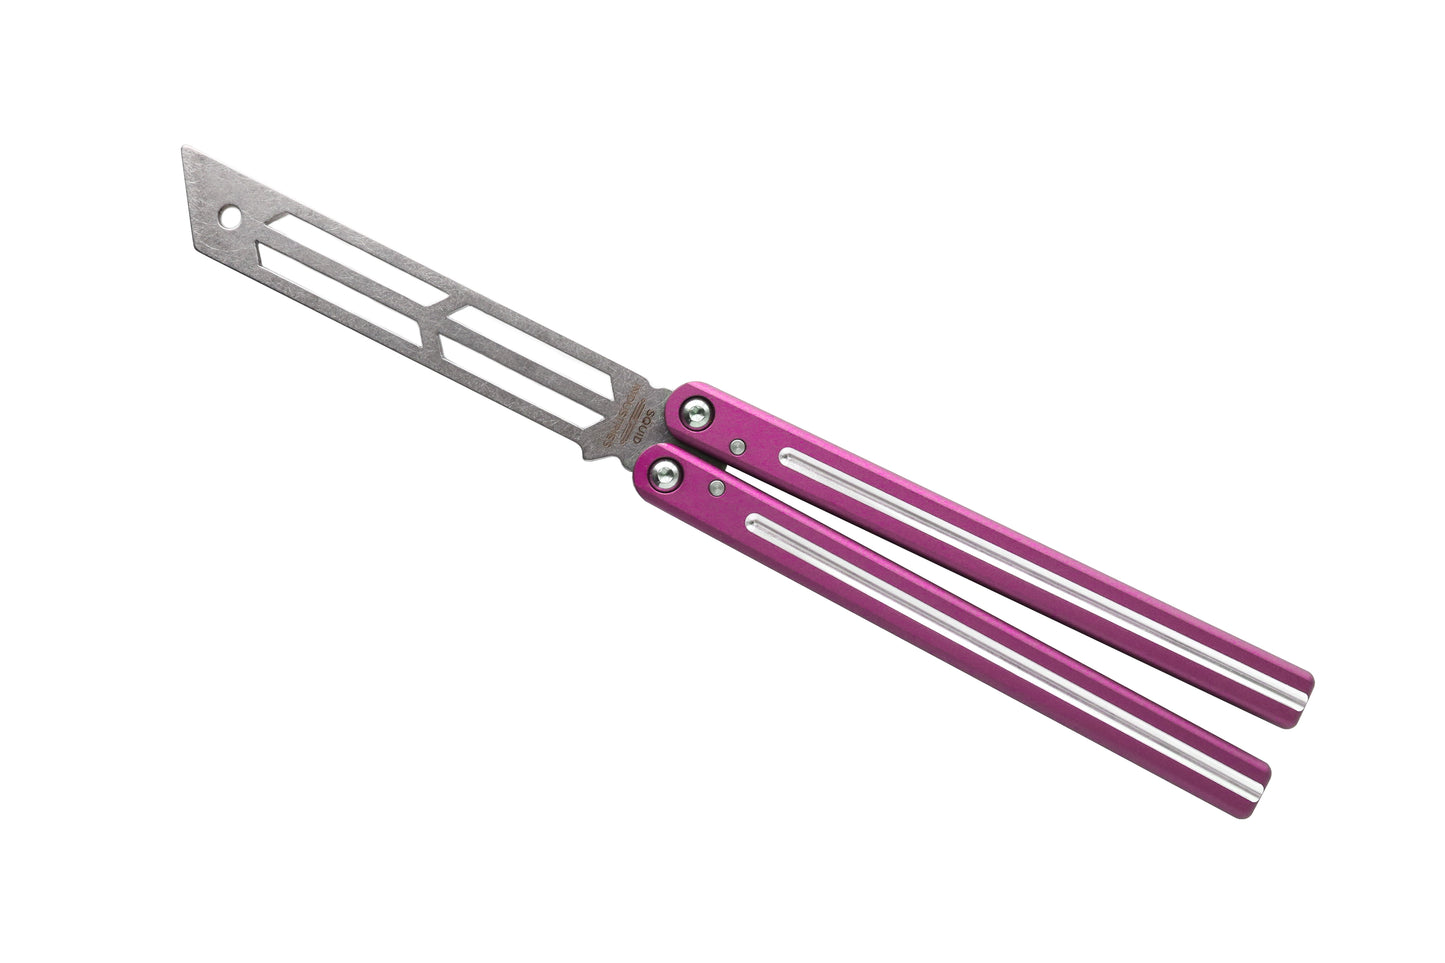 dual-tone pink Triton V2 Clearance Blemished Balisong Butterfly Knife Trainer